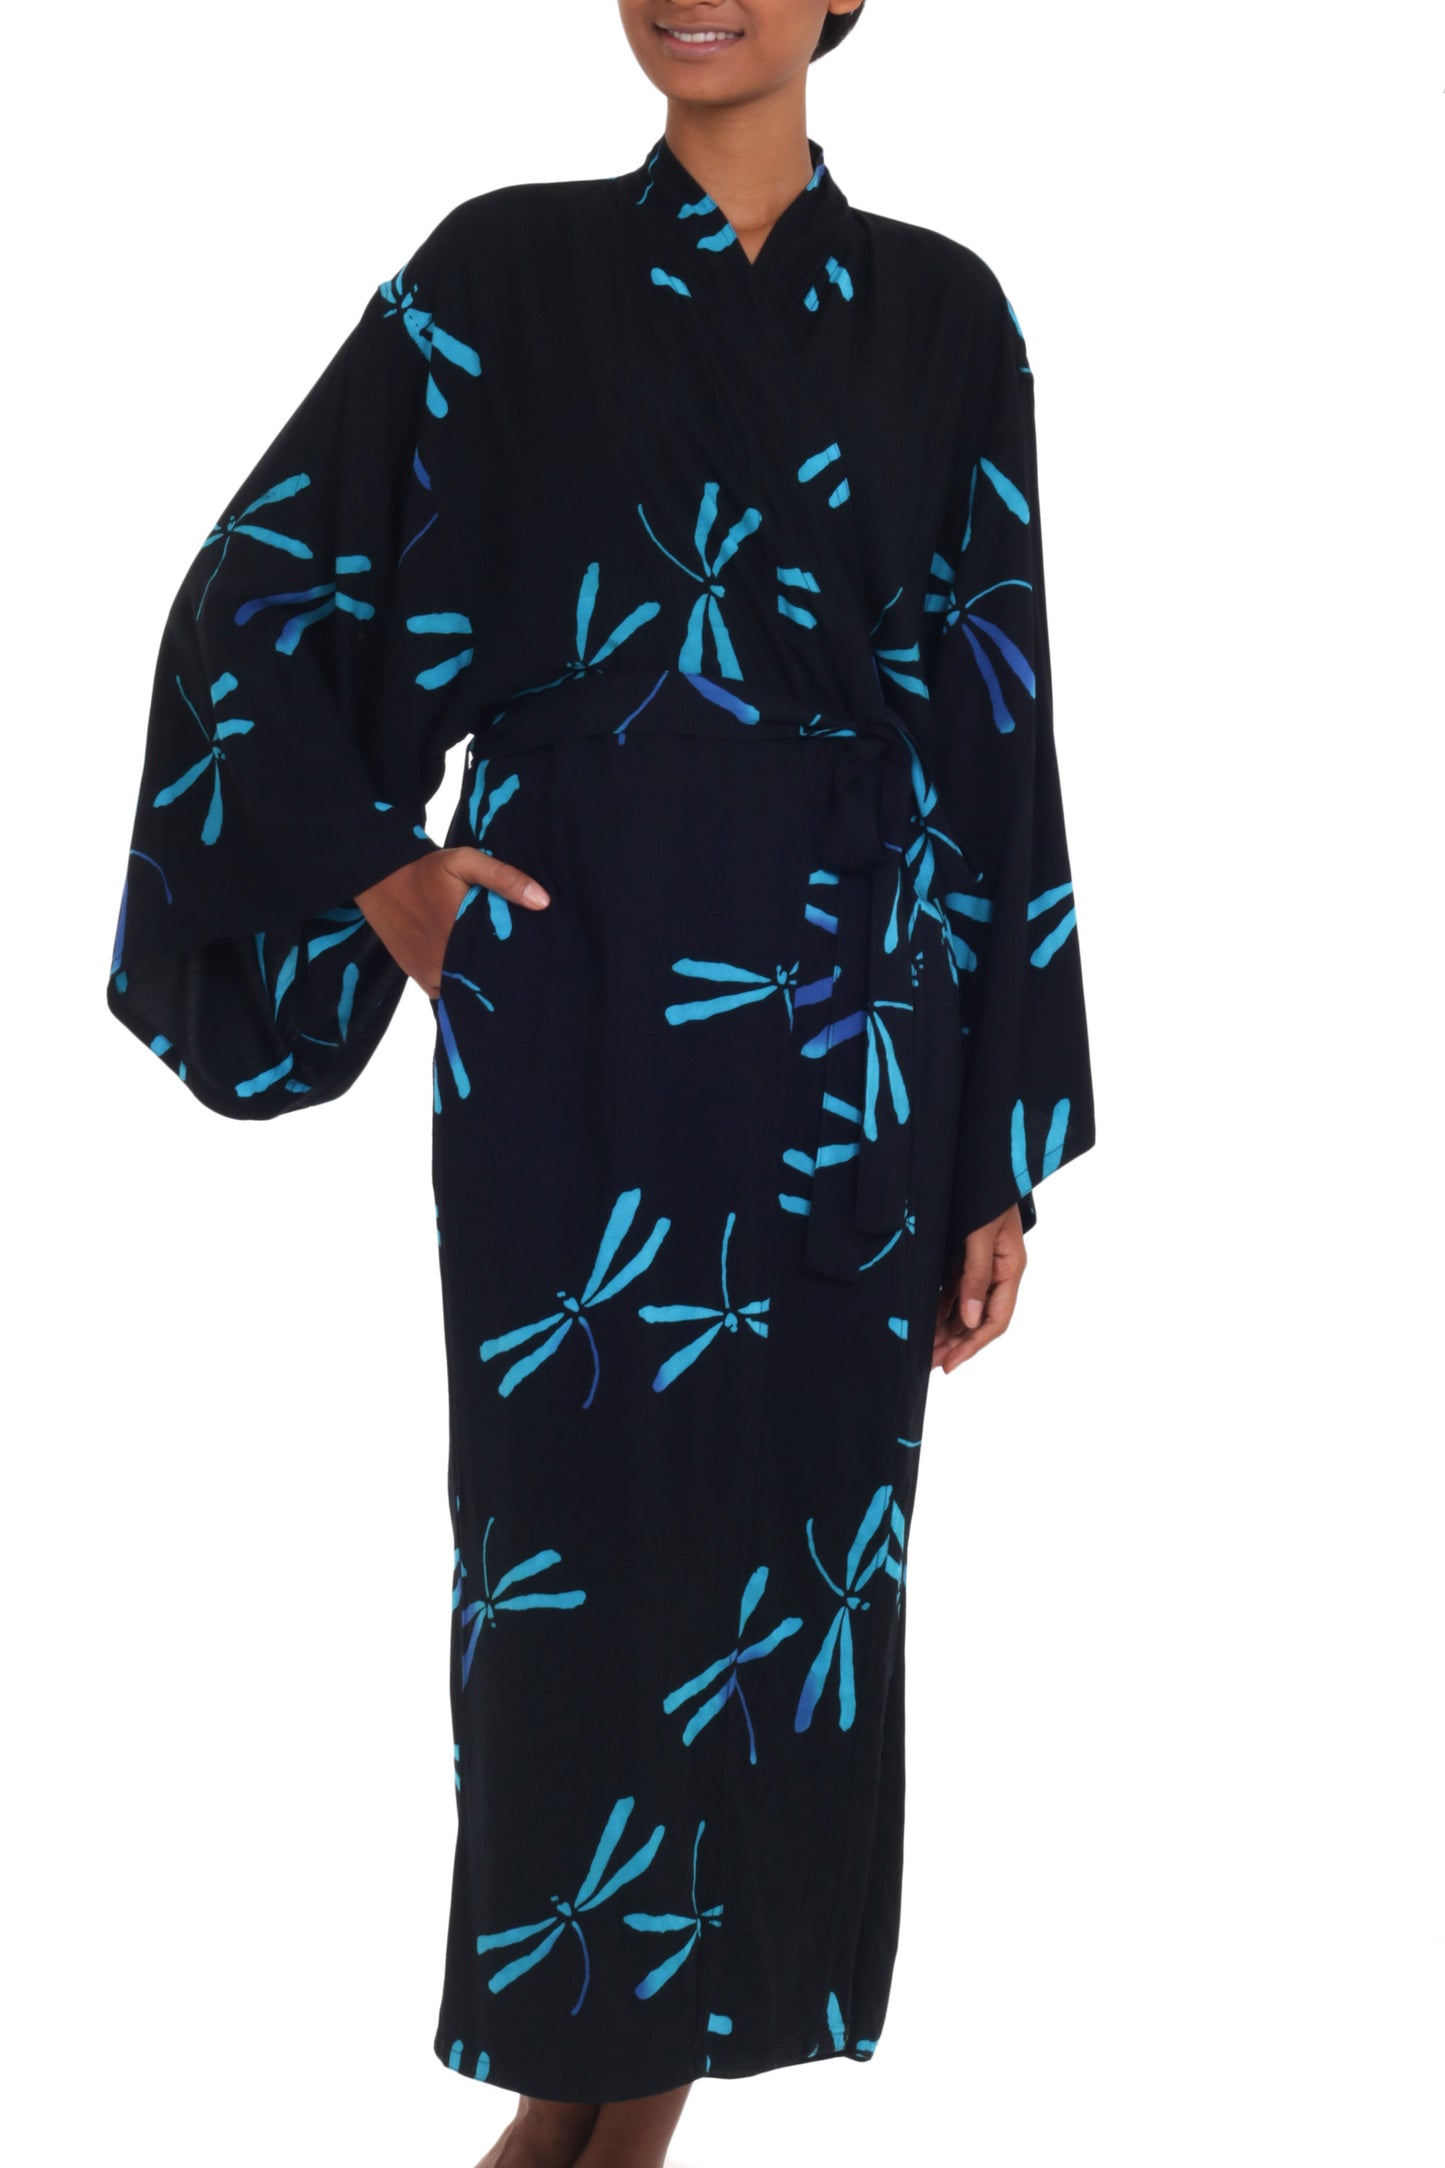 Night Dragonflies Handcrafted Black Batik Robe with Dragonflies from Bali